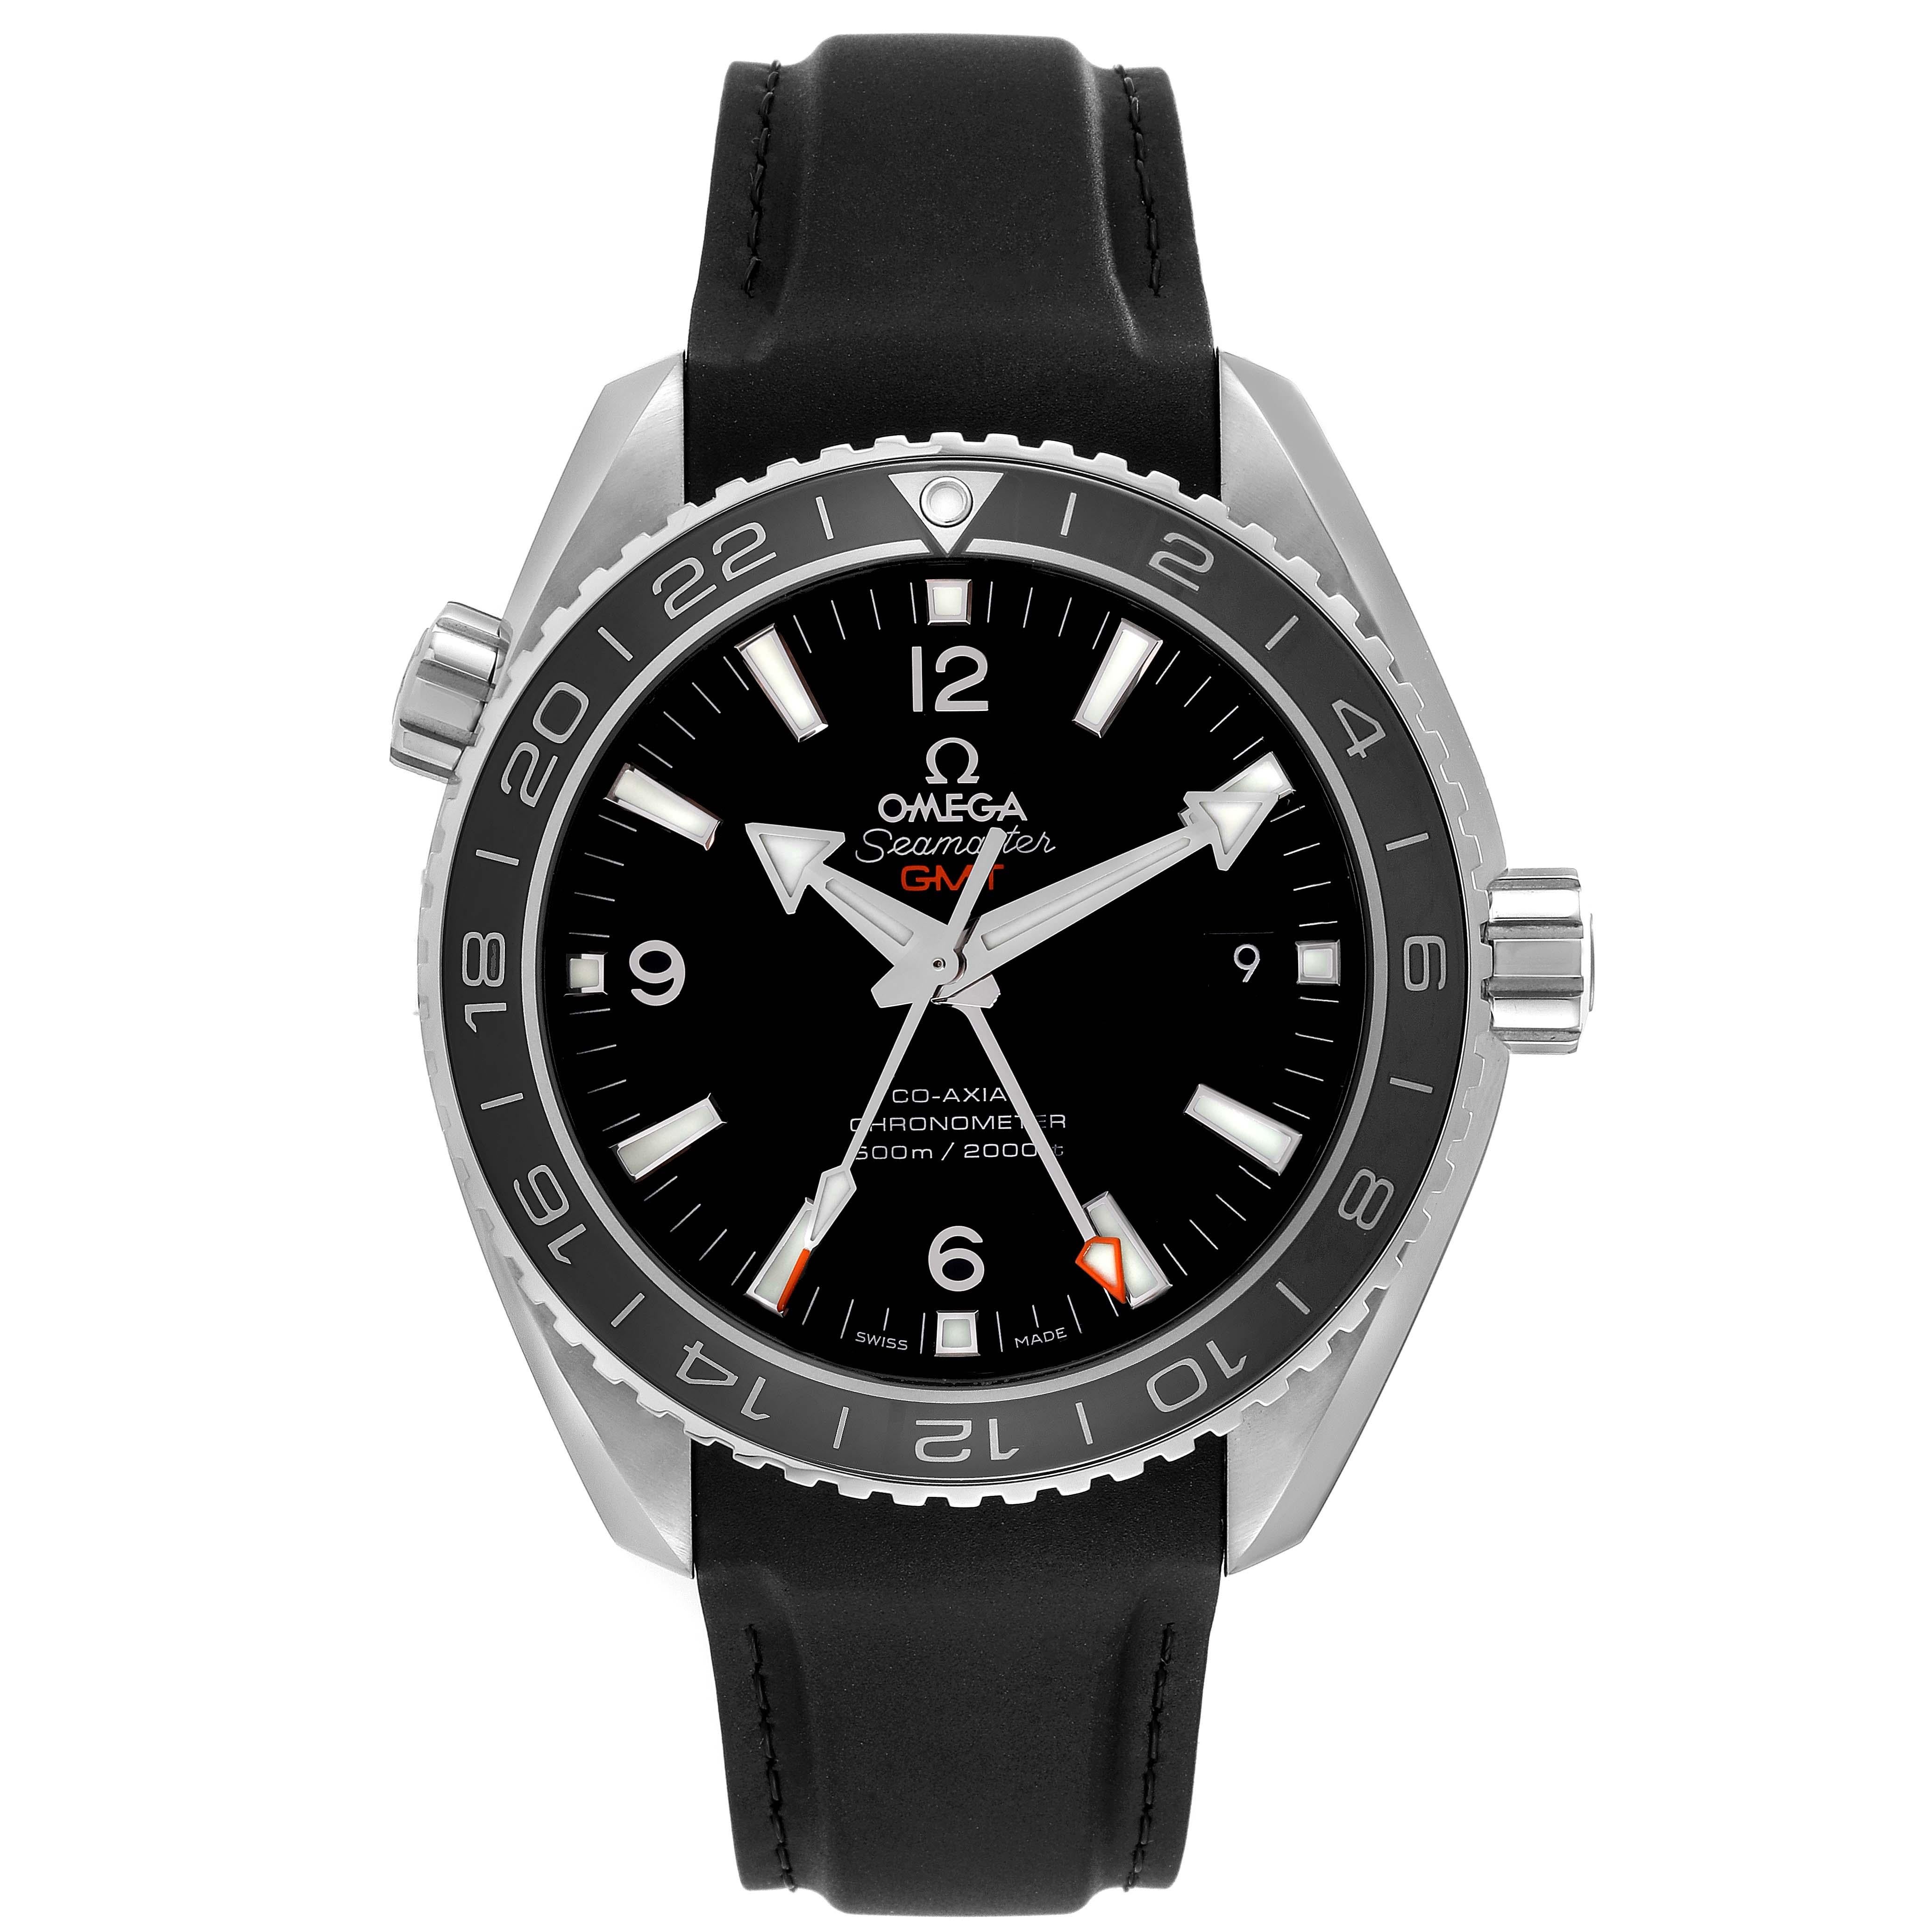 Omega Seamaster Planet Ocean GMT Steel Mens Watch 232.32.44.22.01.001 Box Card. Automatic self-winding chronometer movement with Co-Axial Escapement for greater precision, stability, and durability. GMT with time zone function. Silicon